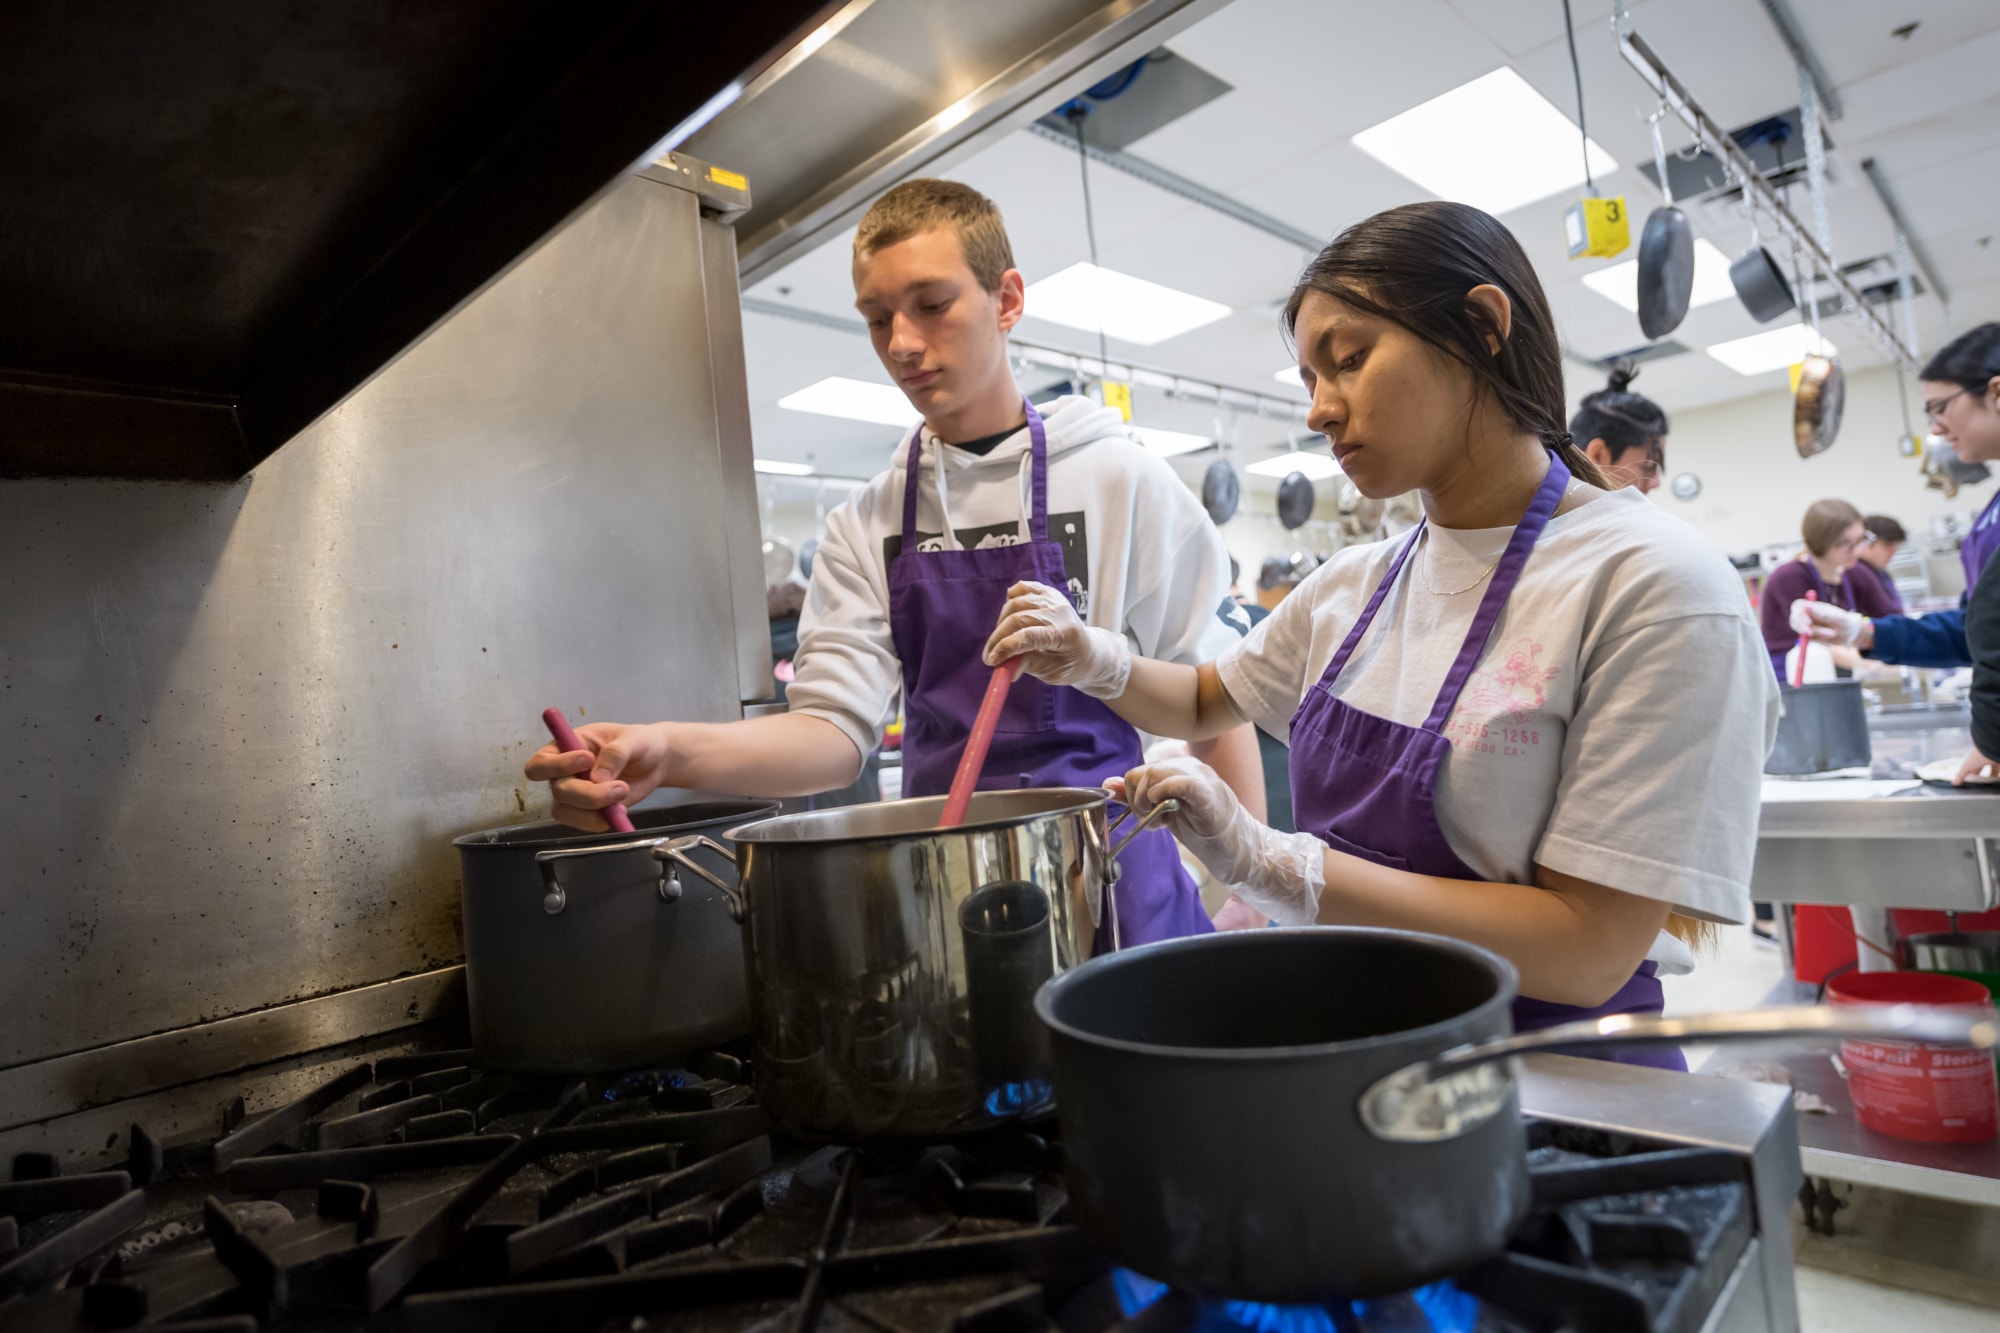 Students cooking on stove